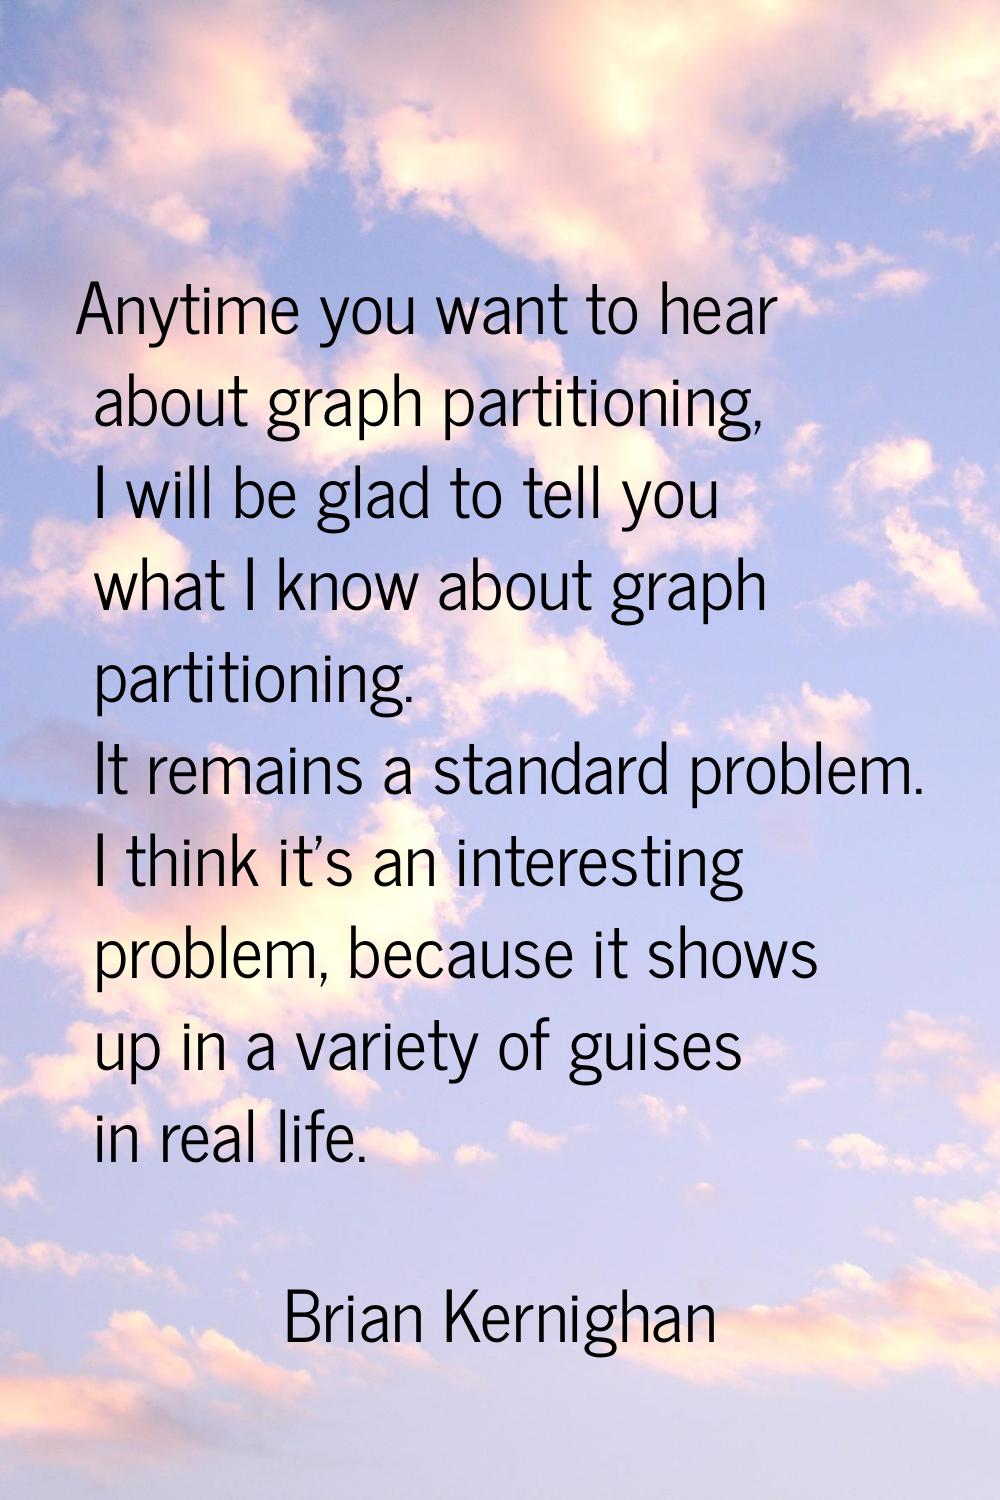 Anytime you want to hear about graph partitioning, I will be glad to tell you what I know about gra